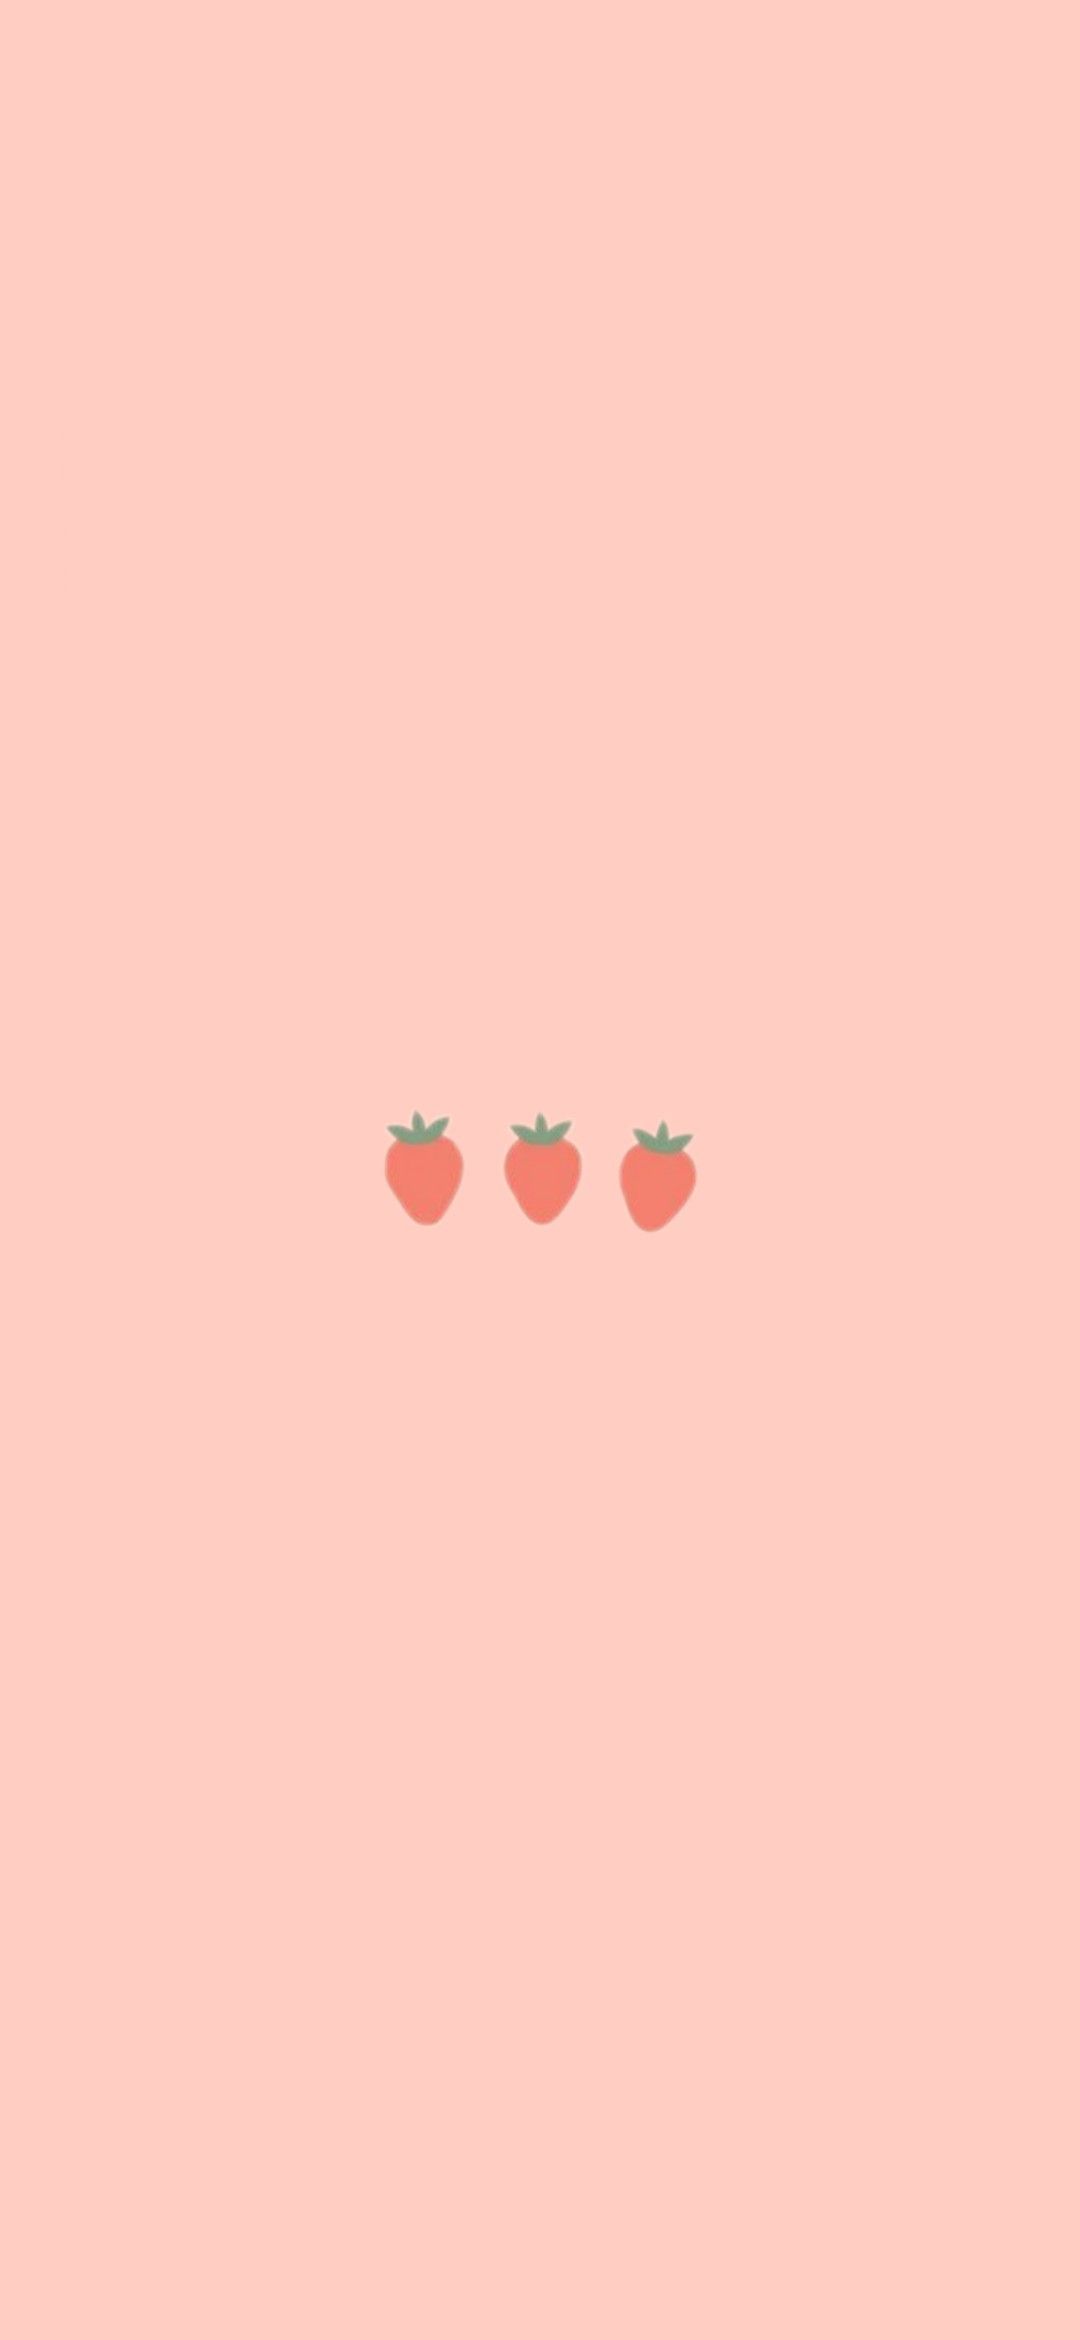 Strawberry Milk Aesthetic Wallpapers Wallpaper Cave Download and use 10,000+ desktop wallpaper aesthetic stock photos for free. strawberry milk aesthetic wallpapers